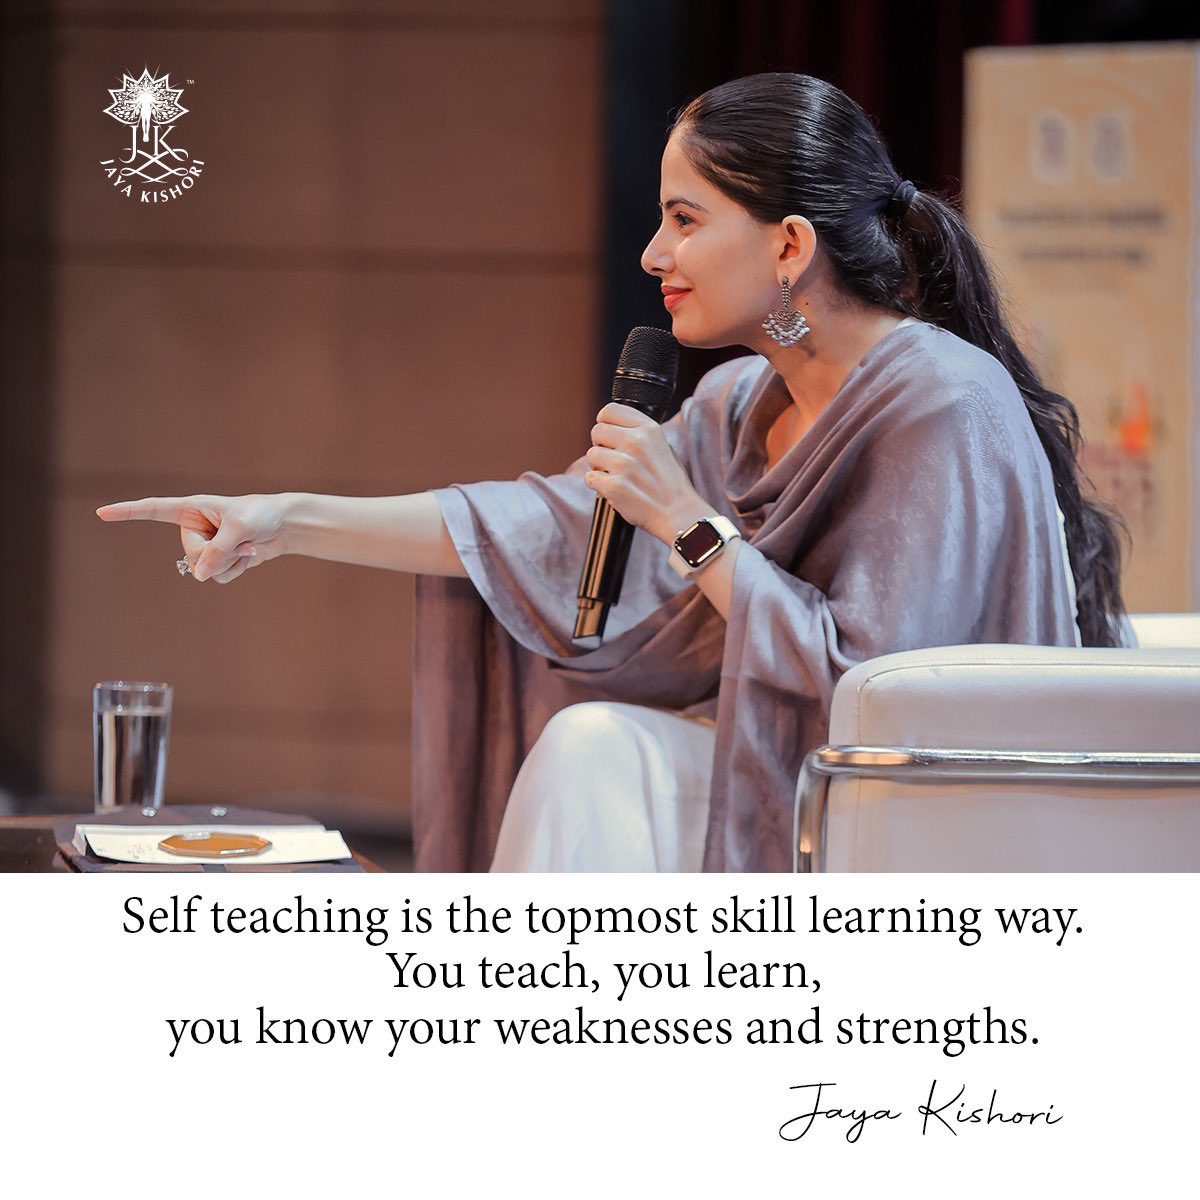 Self teaching is the topmost skill learning way. You teach, you learn, you know your weaknesses and strengths.
#jayakishori #jayakishorimotivation #motivationalquote #dailymotivation #harekrishna